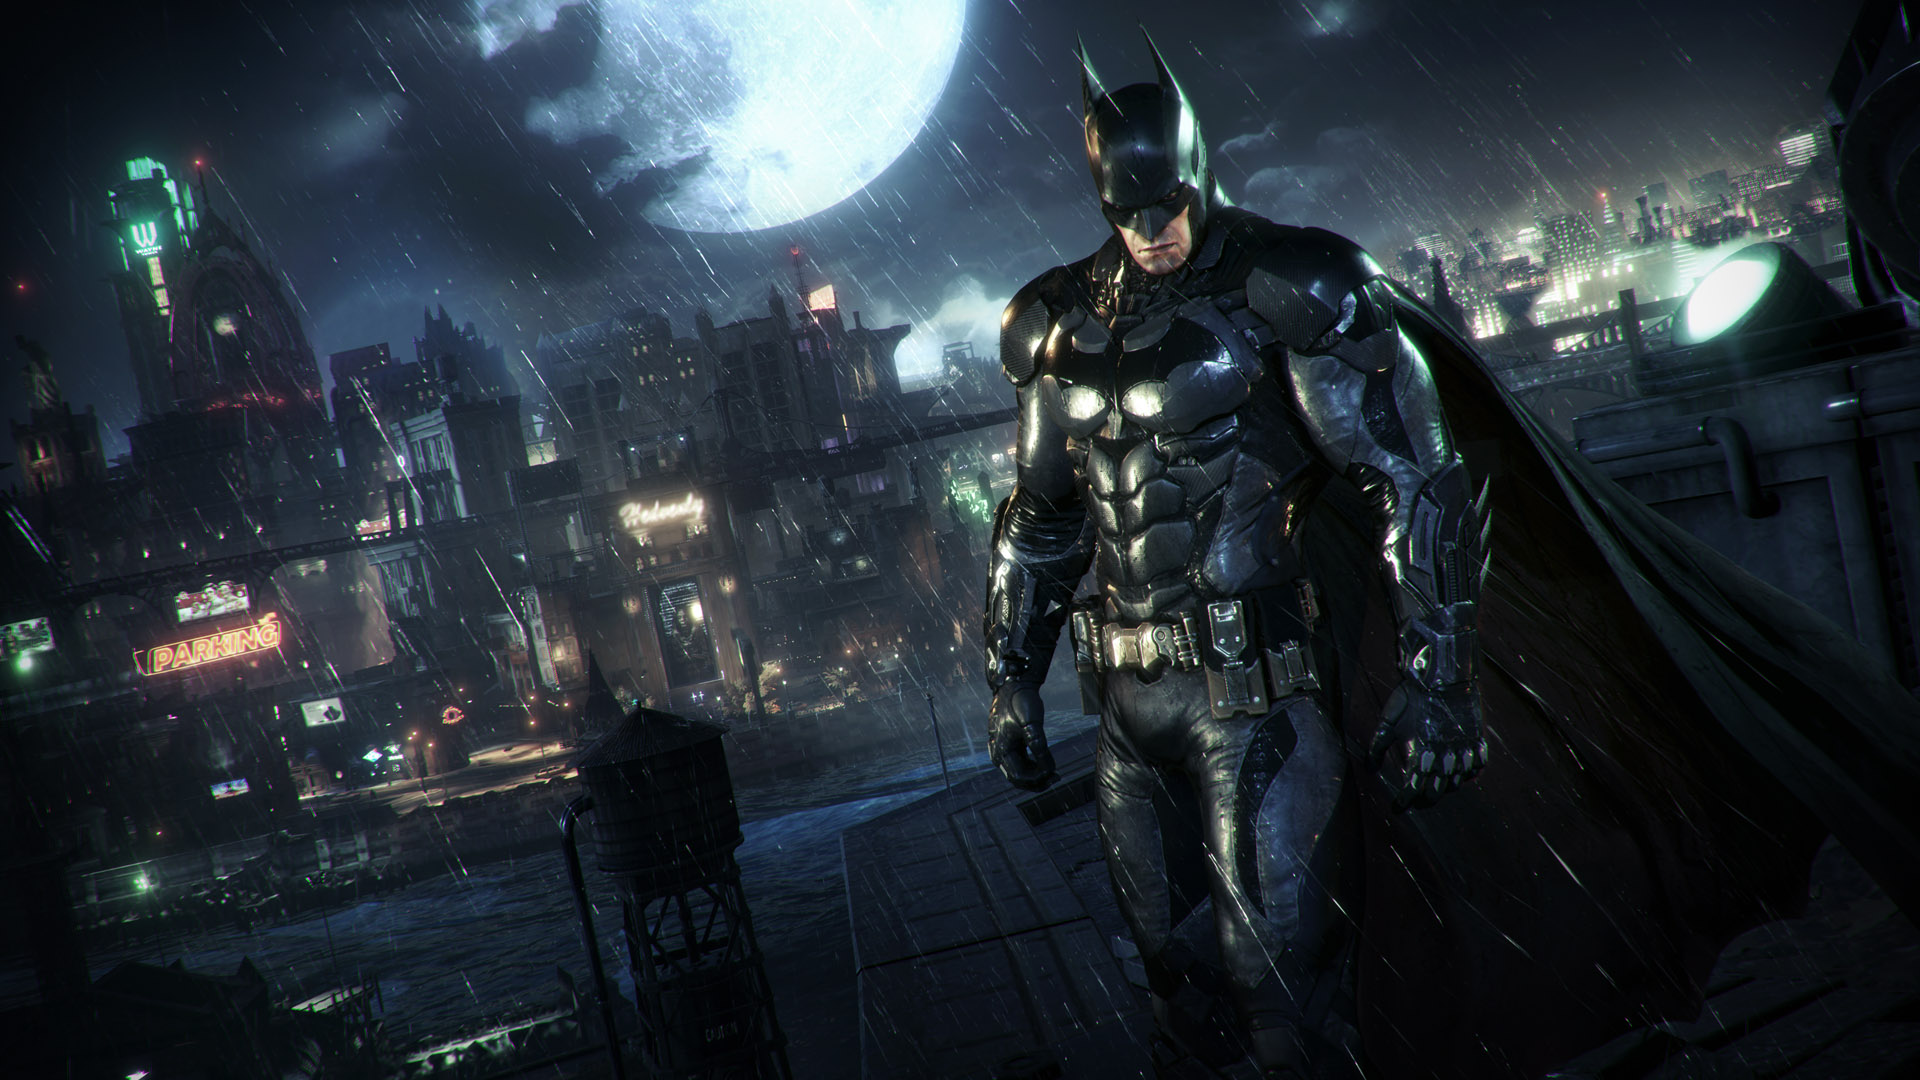 Here's Why Batman: Arkham Knight Is Getting An 'M' Rating From The ESRB